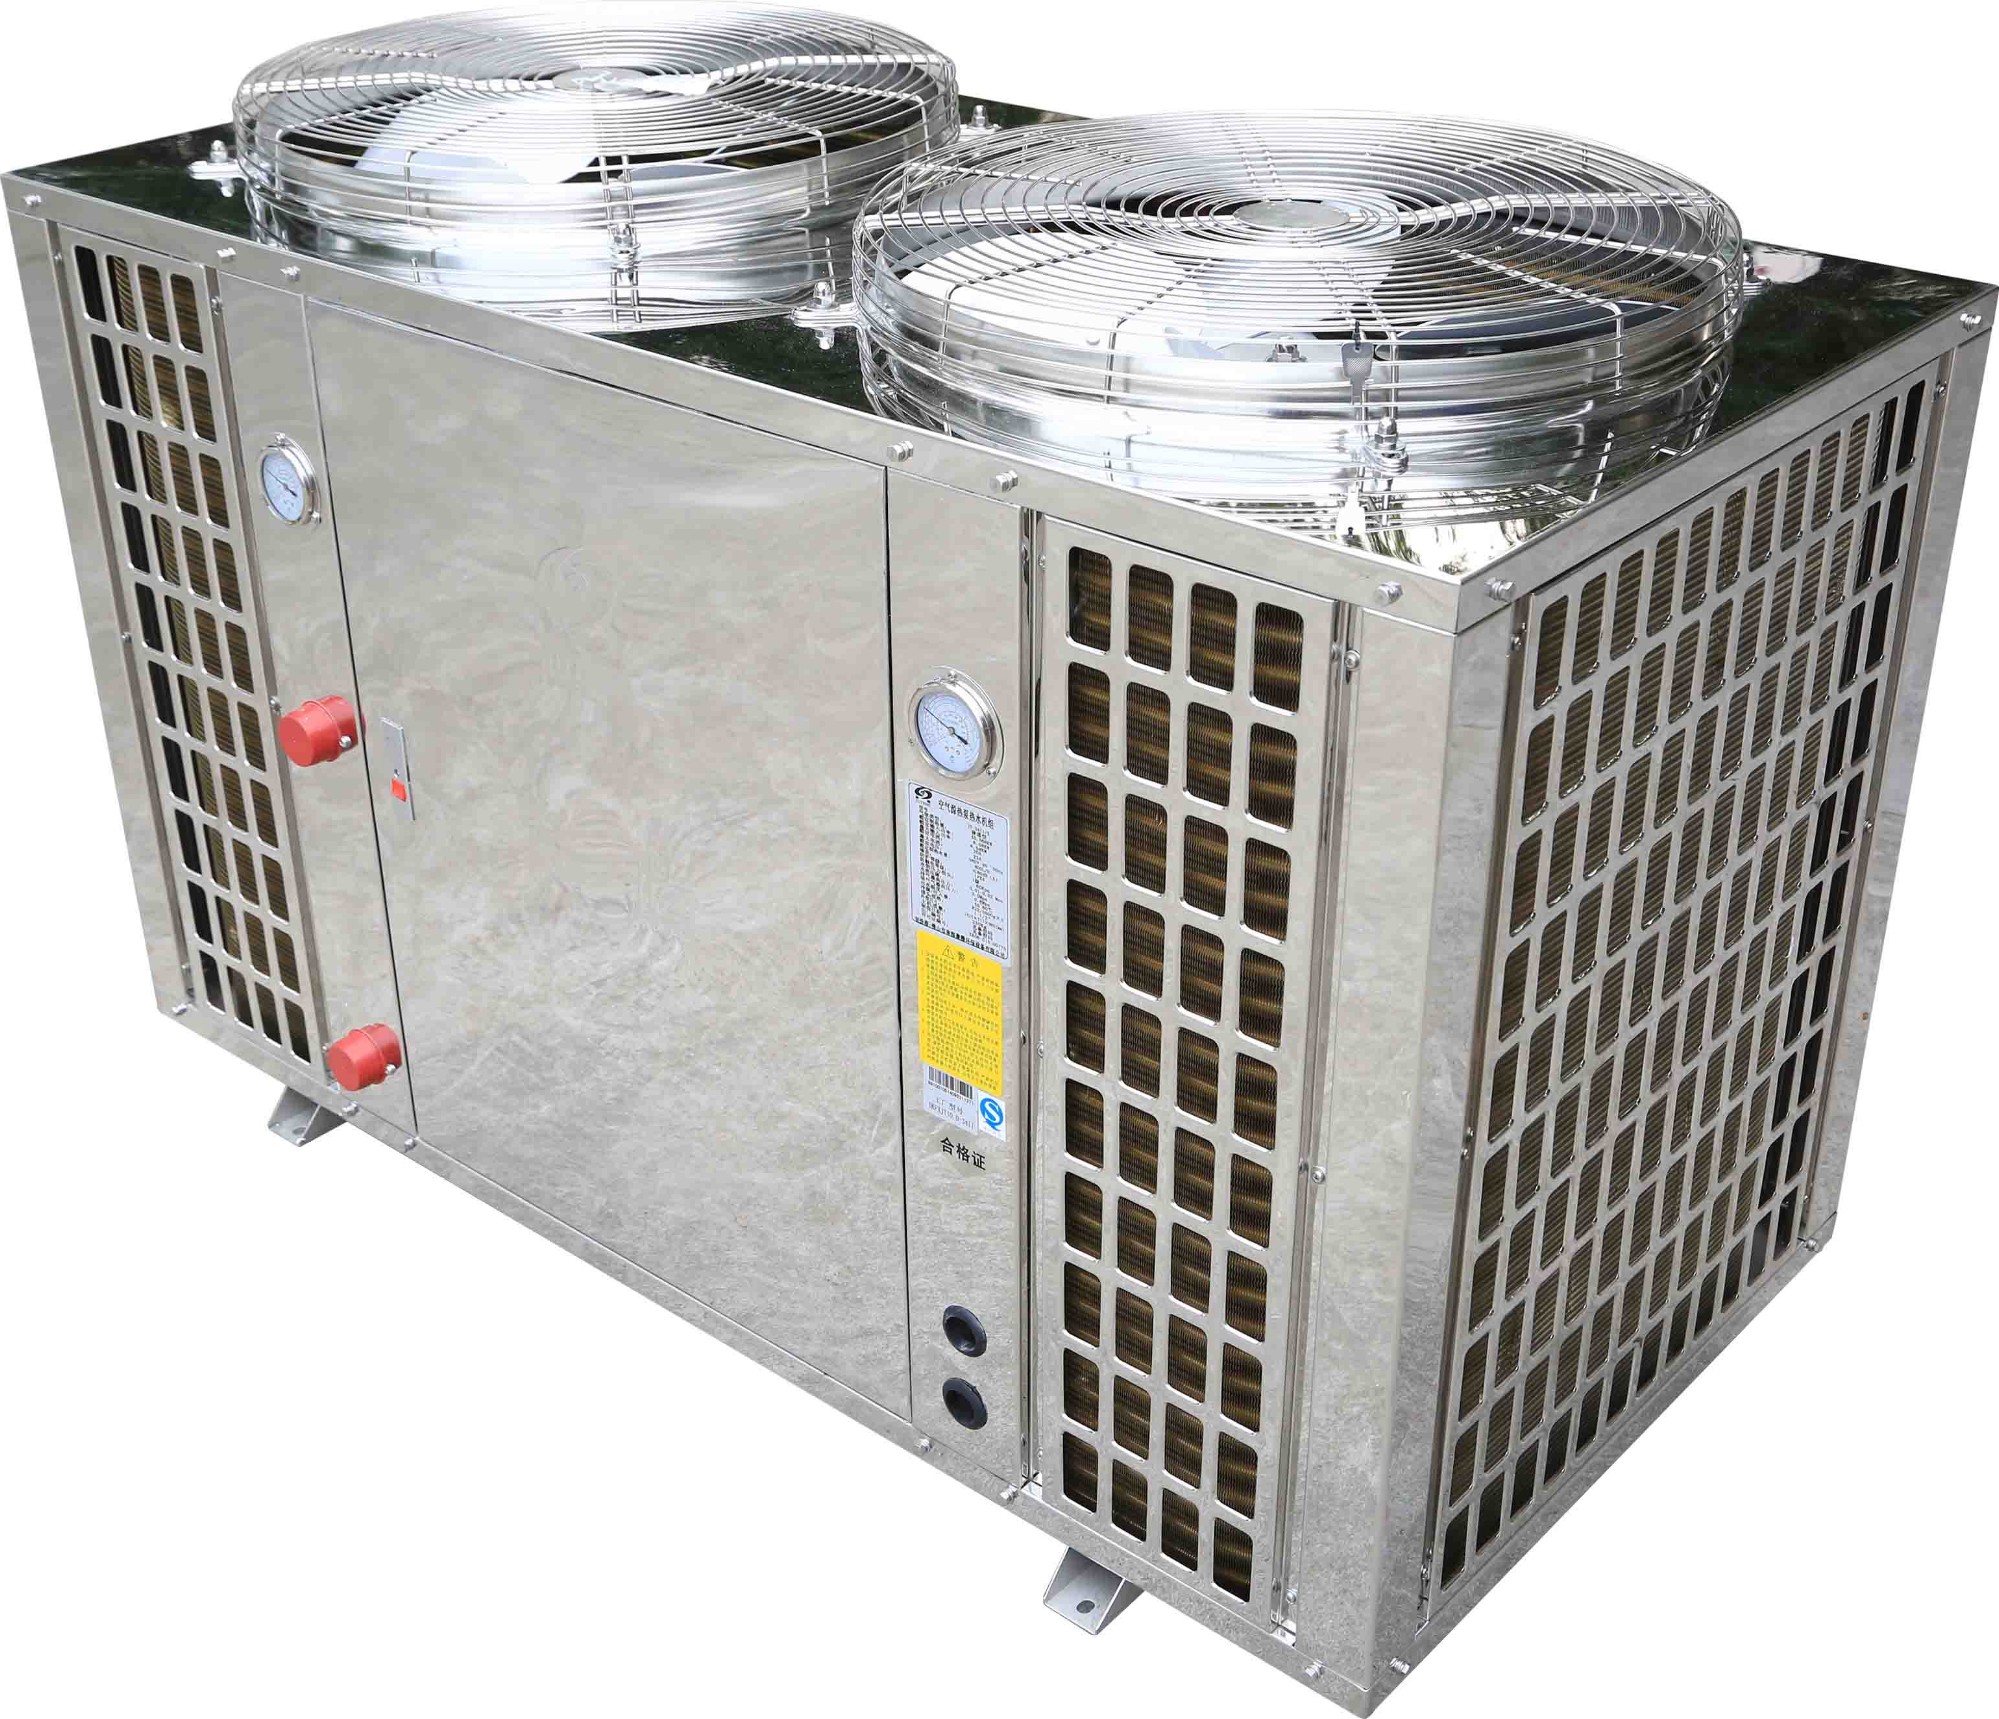 High quality energy saving techology  Heat Pumps For Low Temp Area Quotes,China heat pump equipment Heat Pumps For Low Temp Area Factory, pump equipmentHeat Pumps For Low Temp Area Purchasing